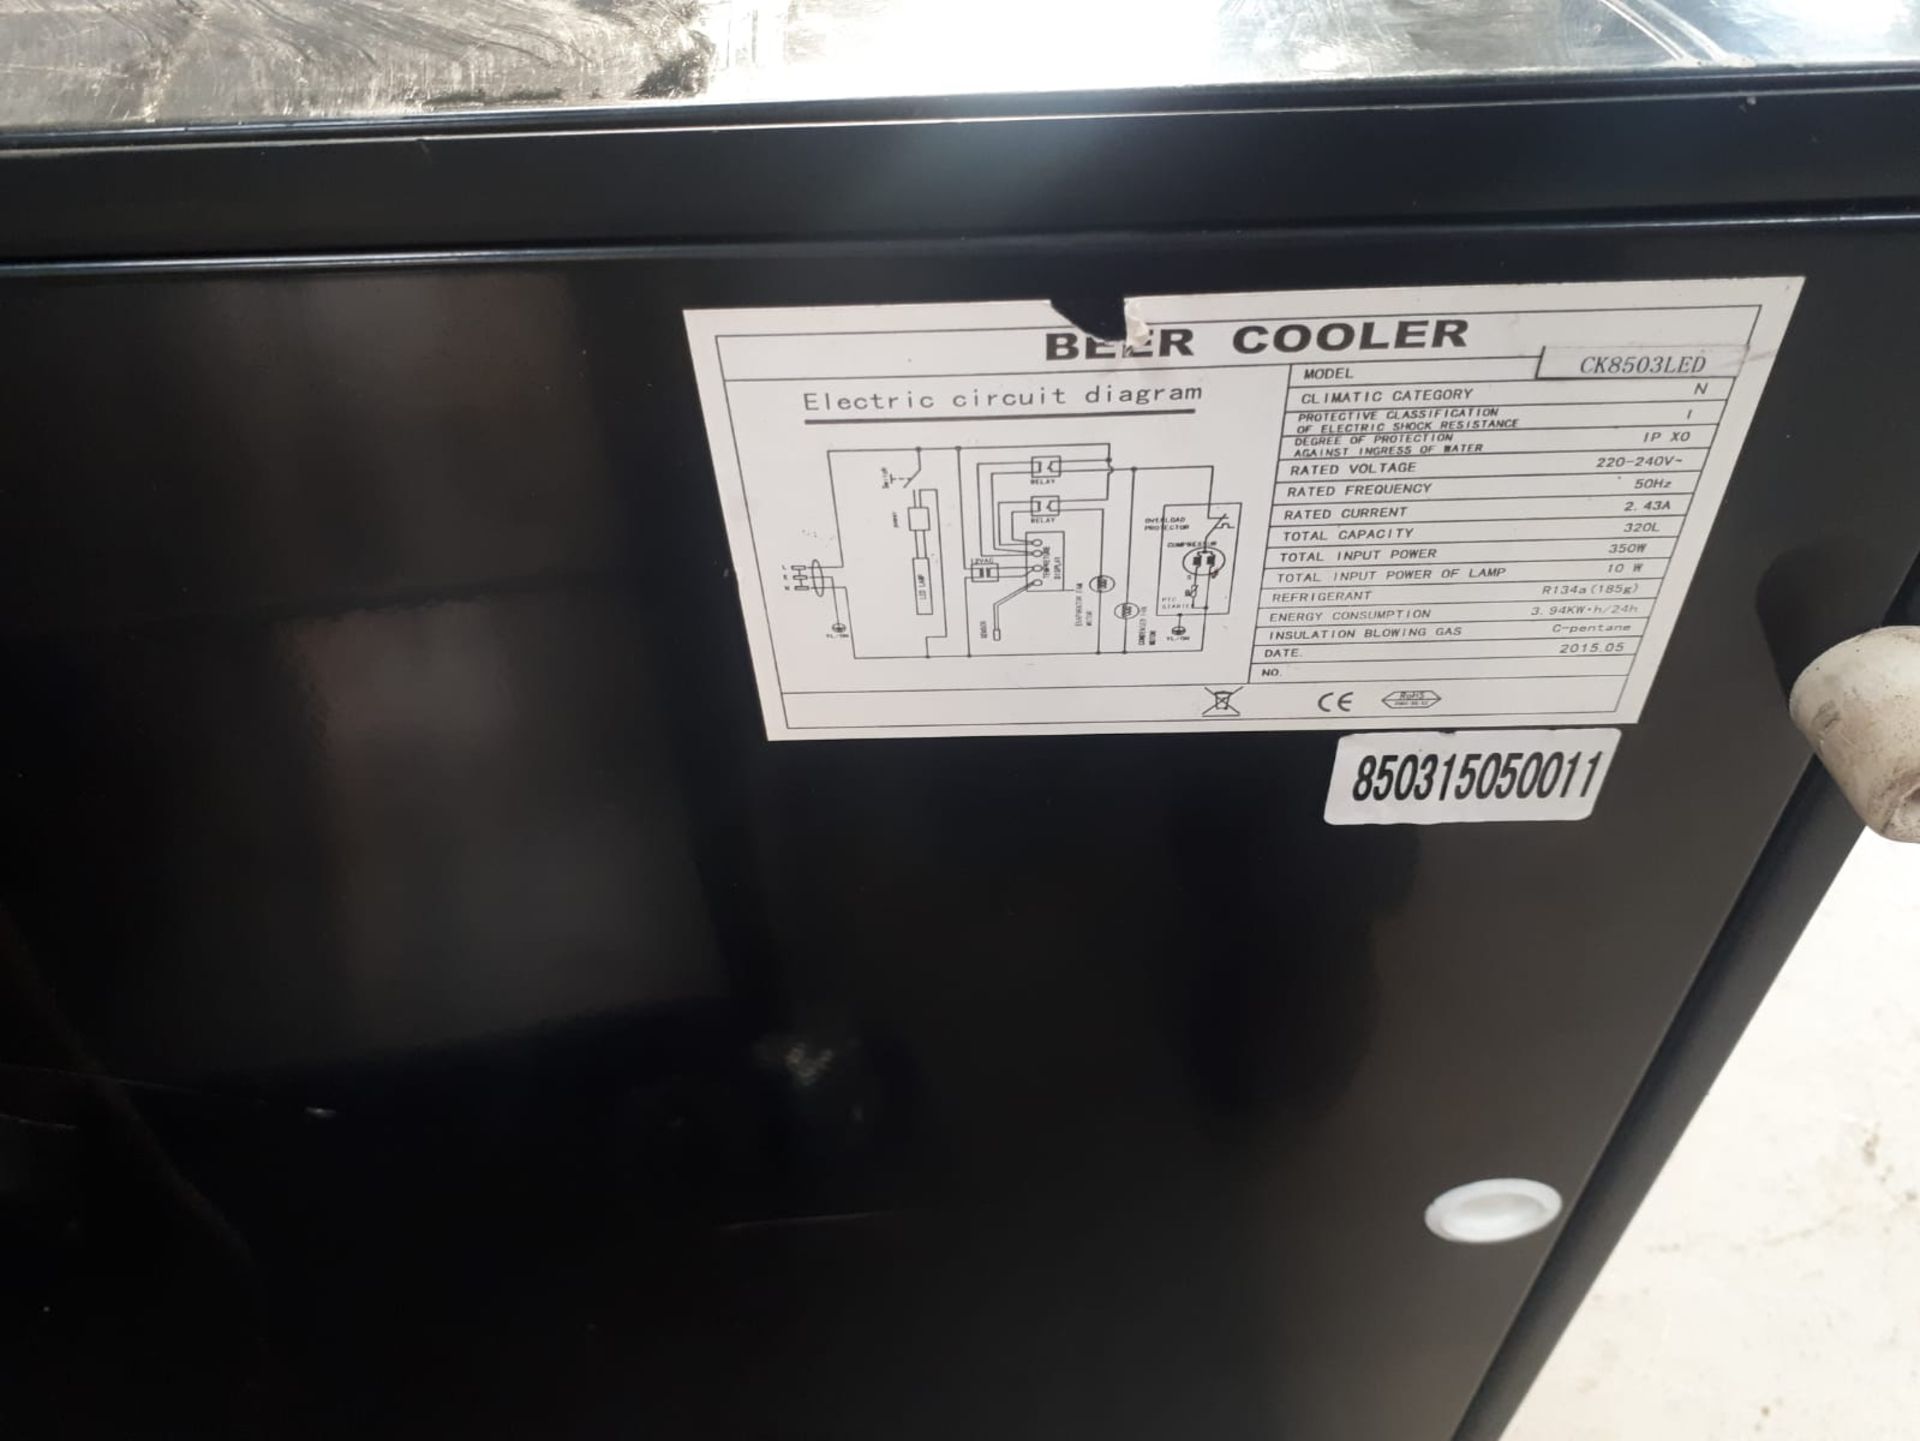 Cater Cool CK8503LED 3 Door Beer Cooler Year of ma - Image 2 of 2